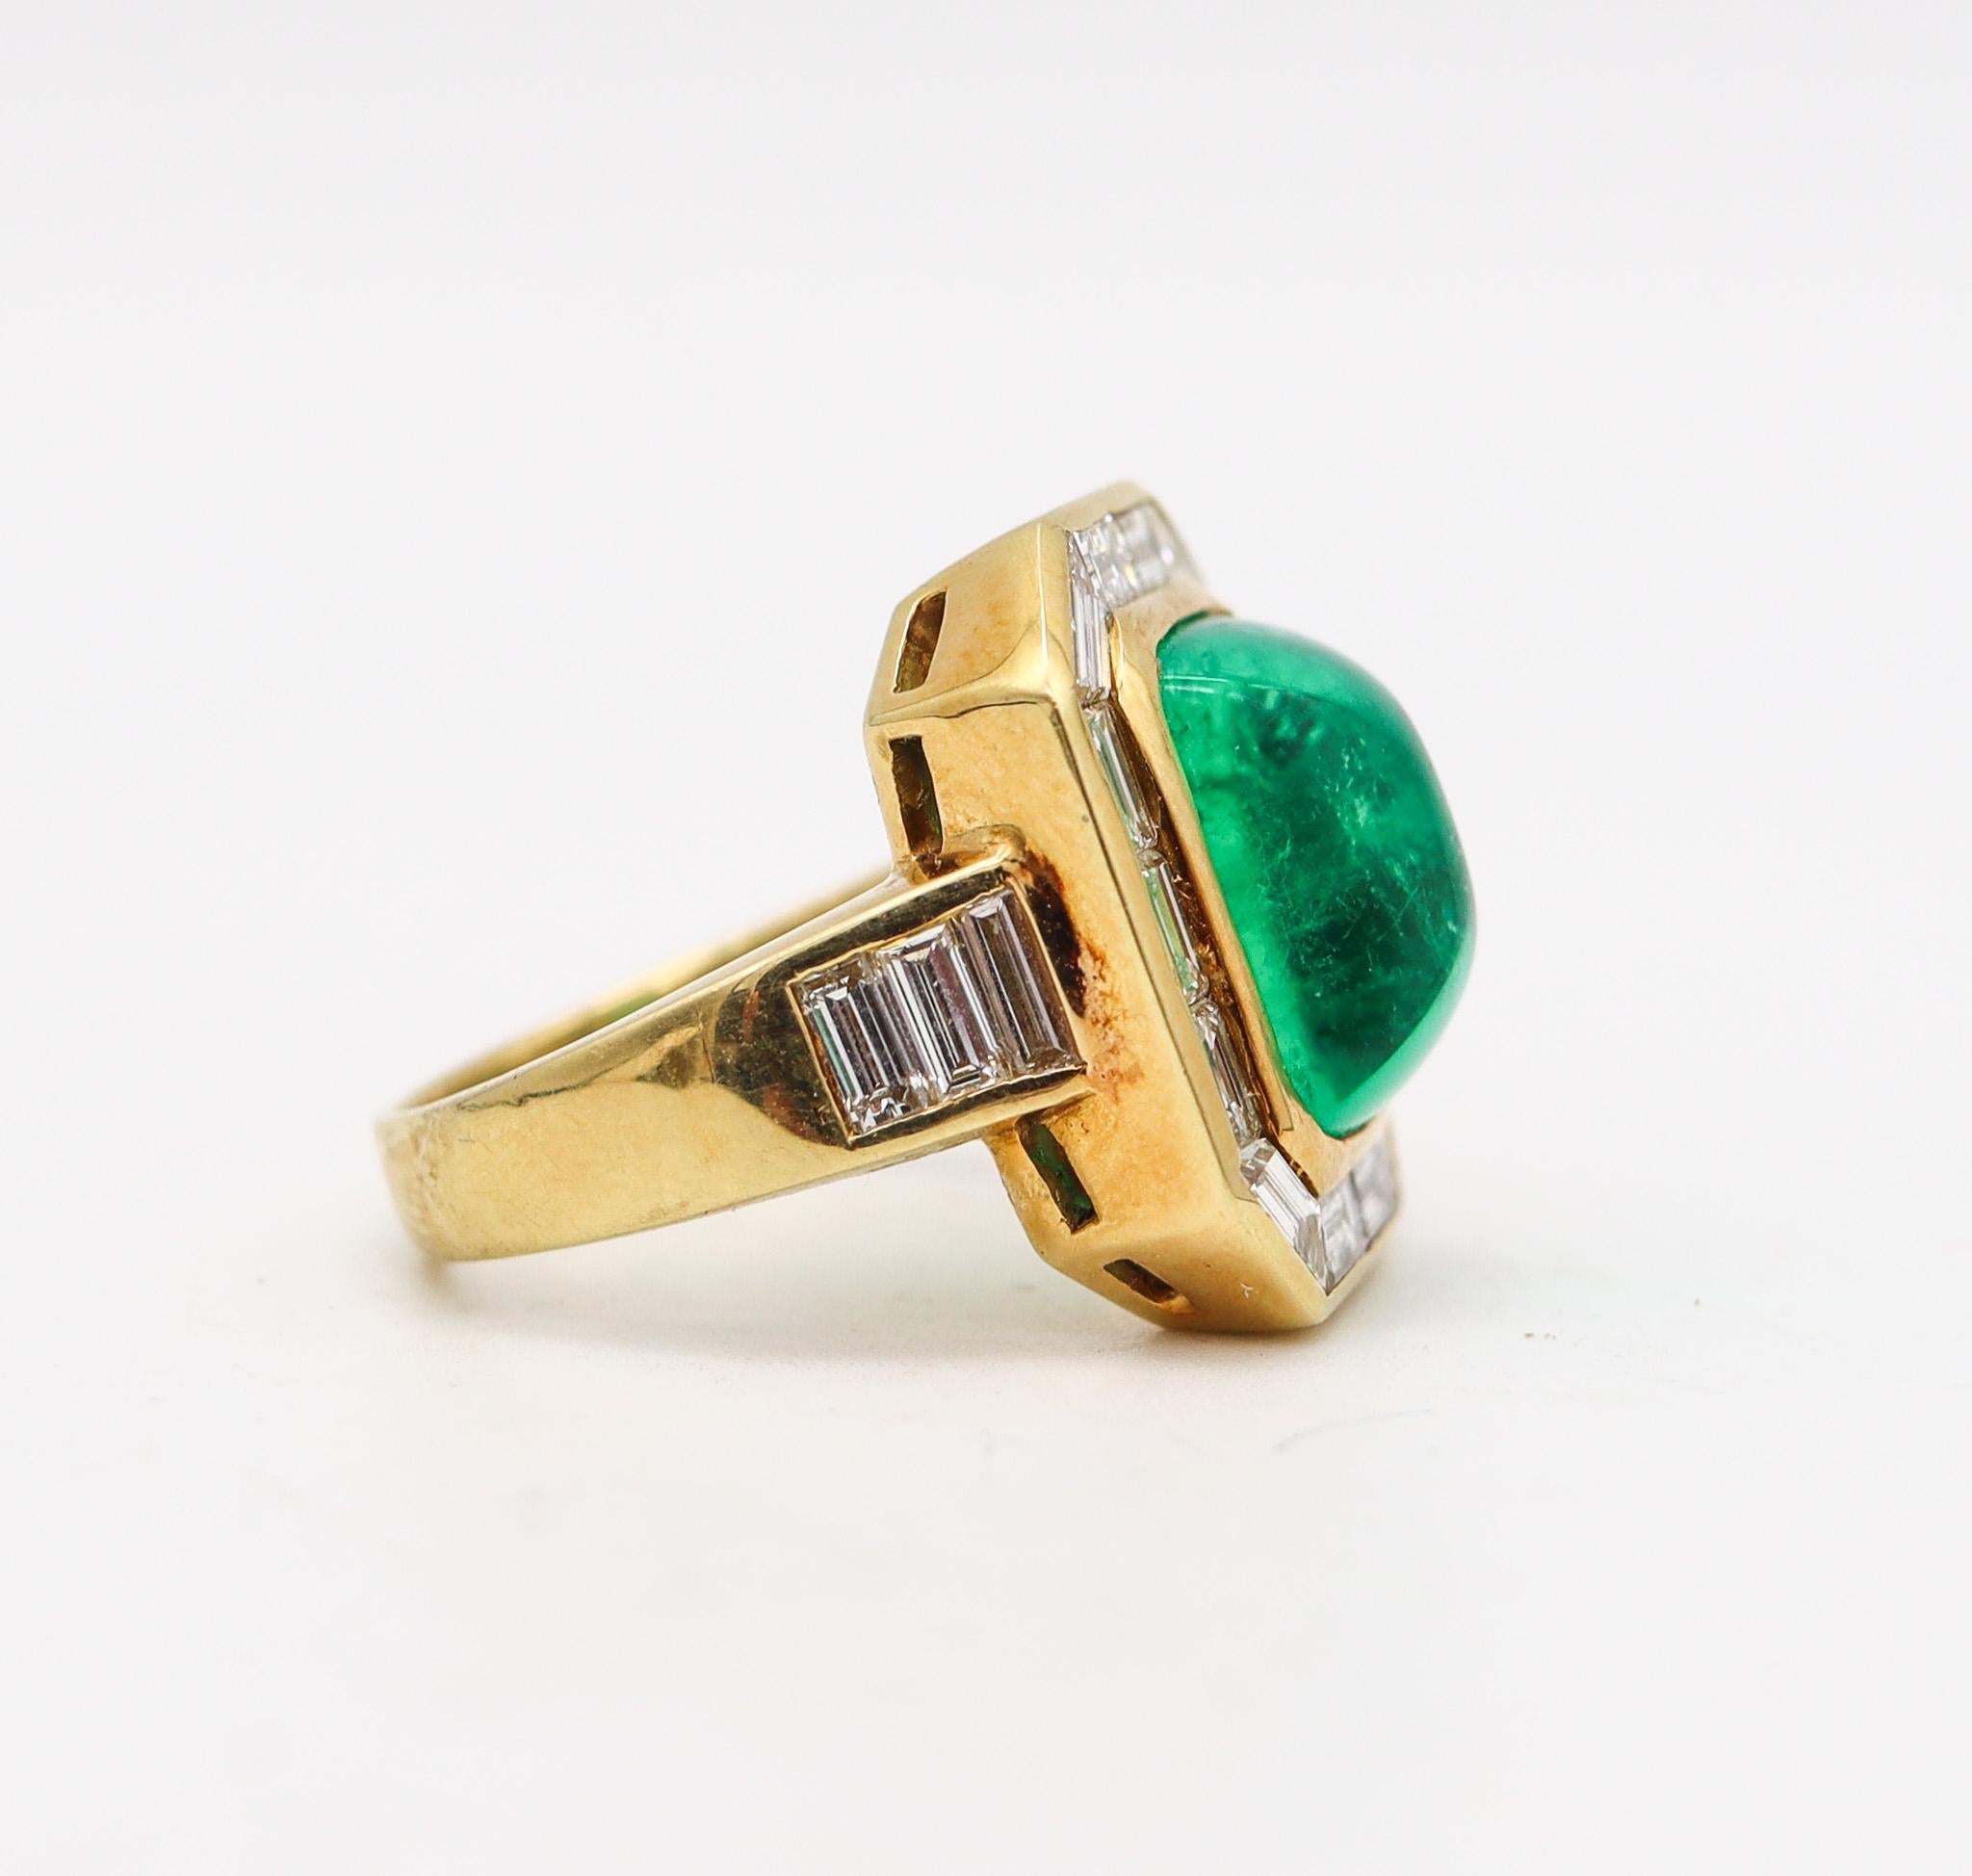 Baguette Cut Bvlgari Cocktail Ring In 18Kt Yellow Gold With 9.04 Ctw In Diamonds And Emerald